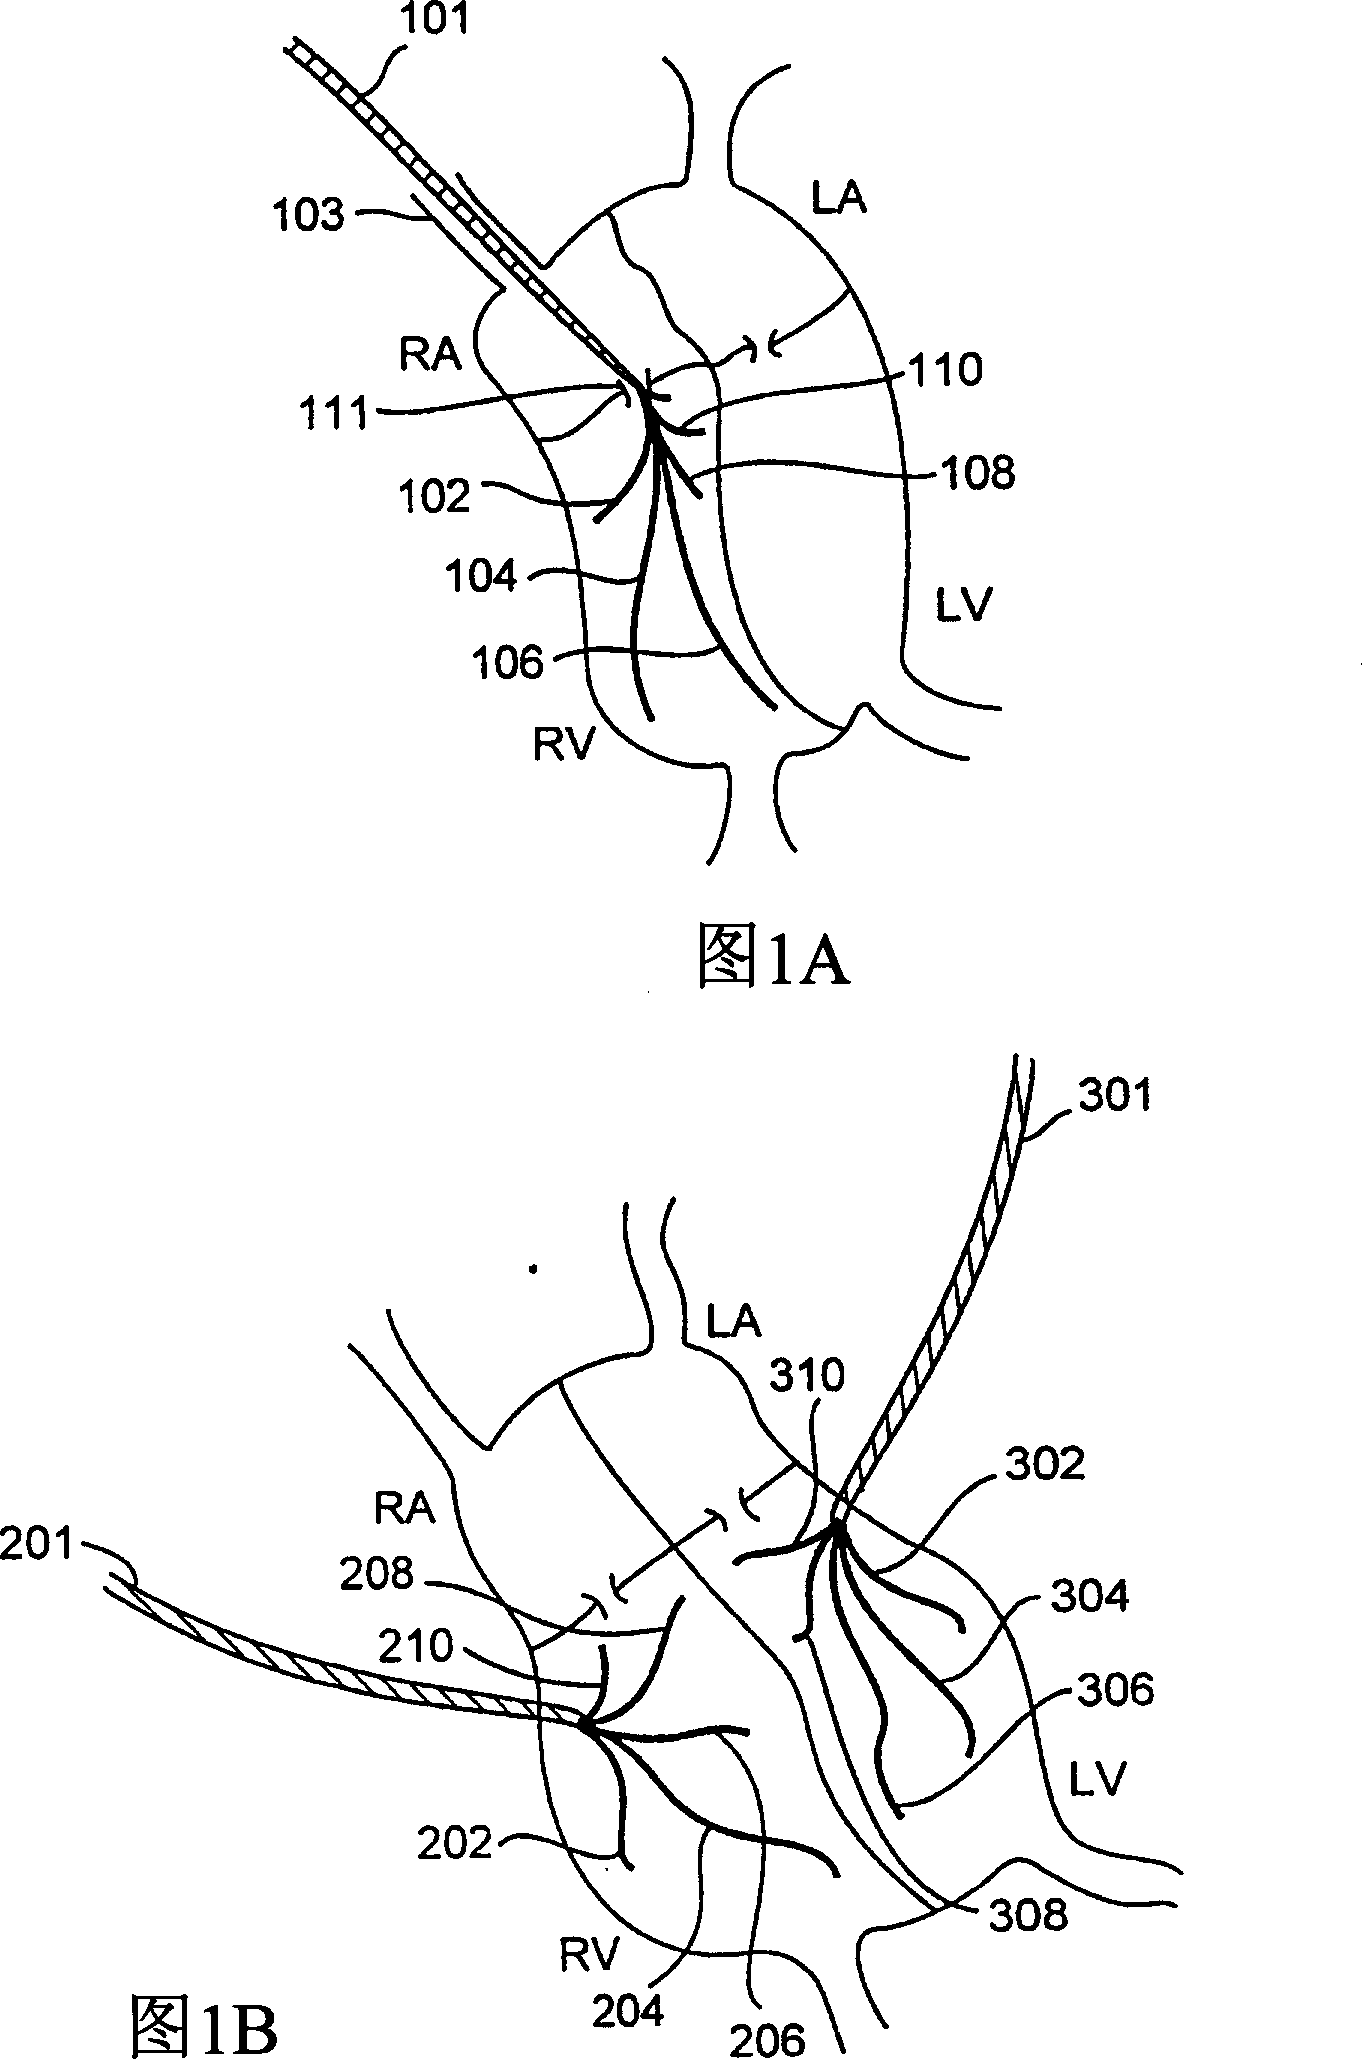 System and method for multiple site biphasic stimulation to revert ventricular arrhythmias